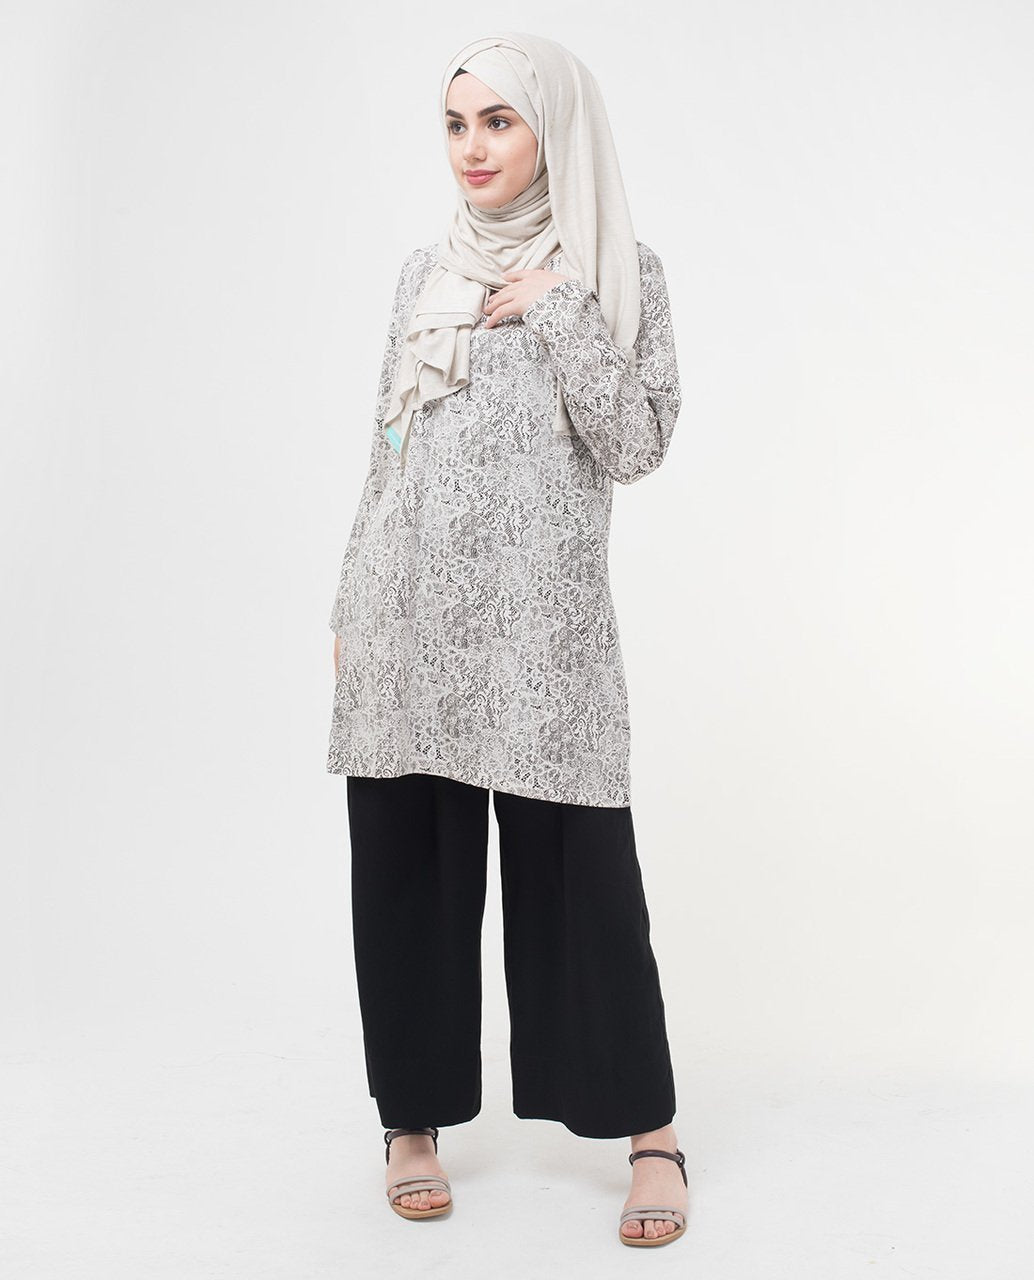 Summer Lace Printed Modest Top Small Petite (- 5'2") 